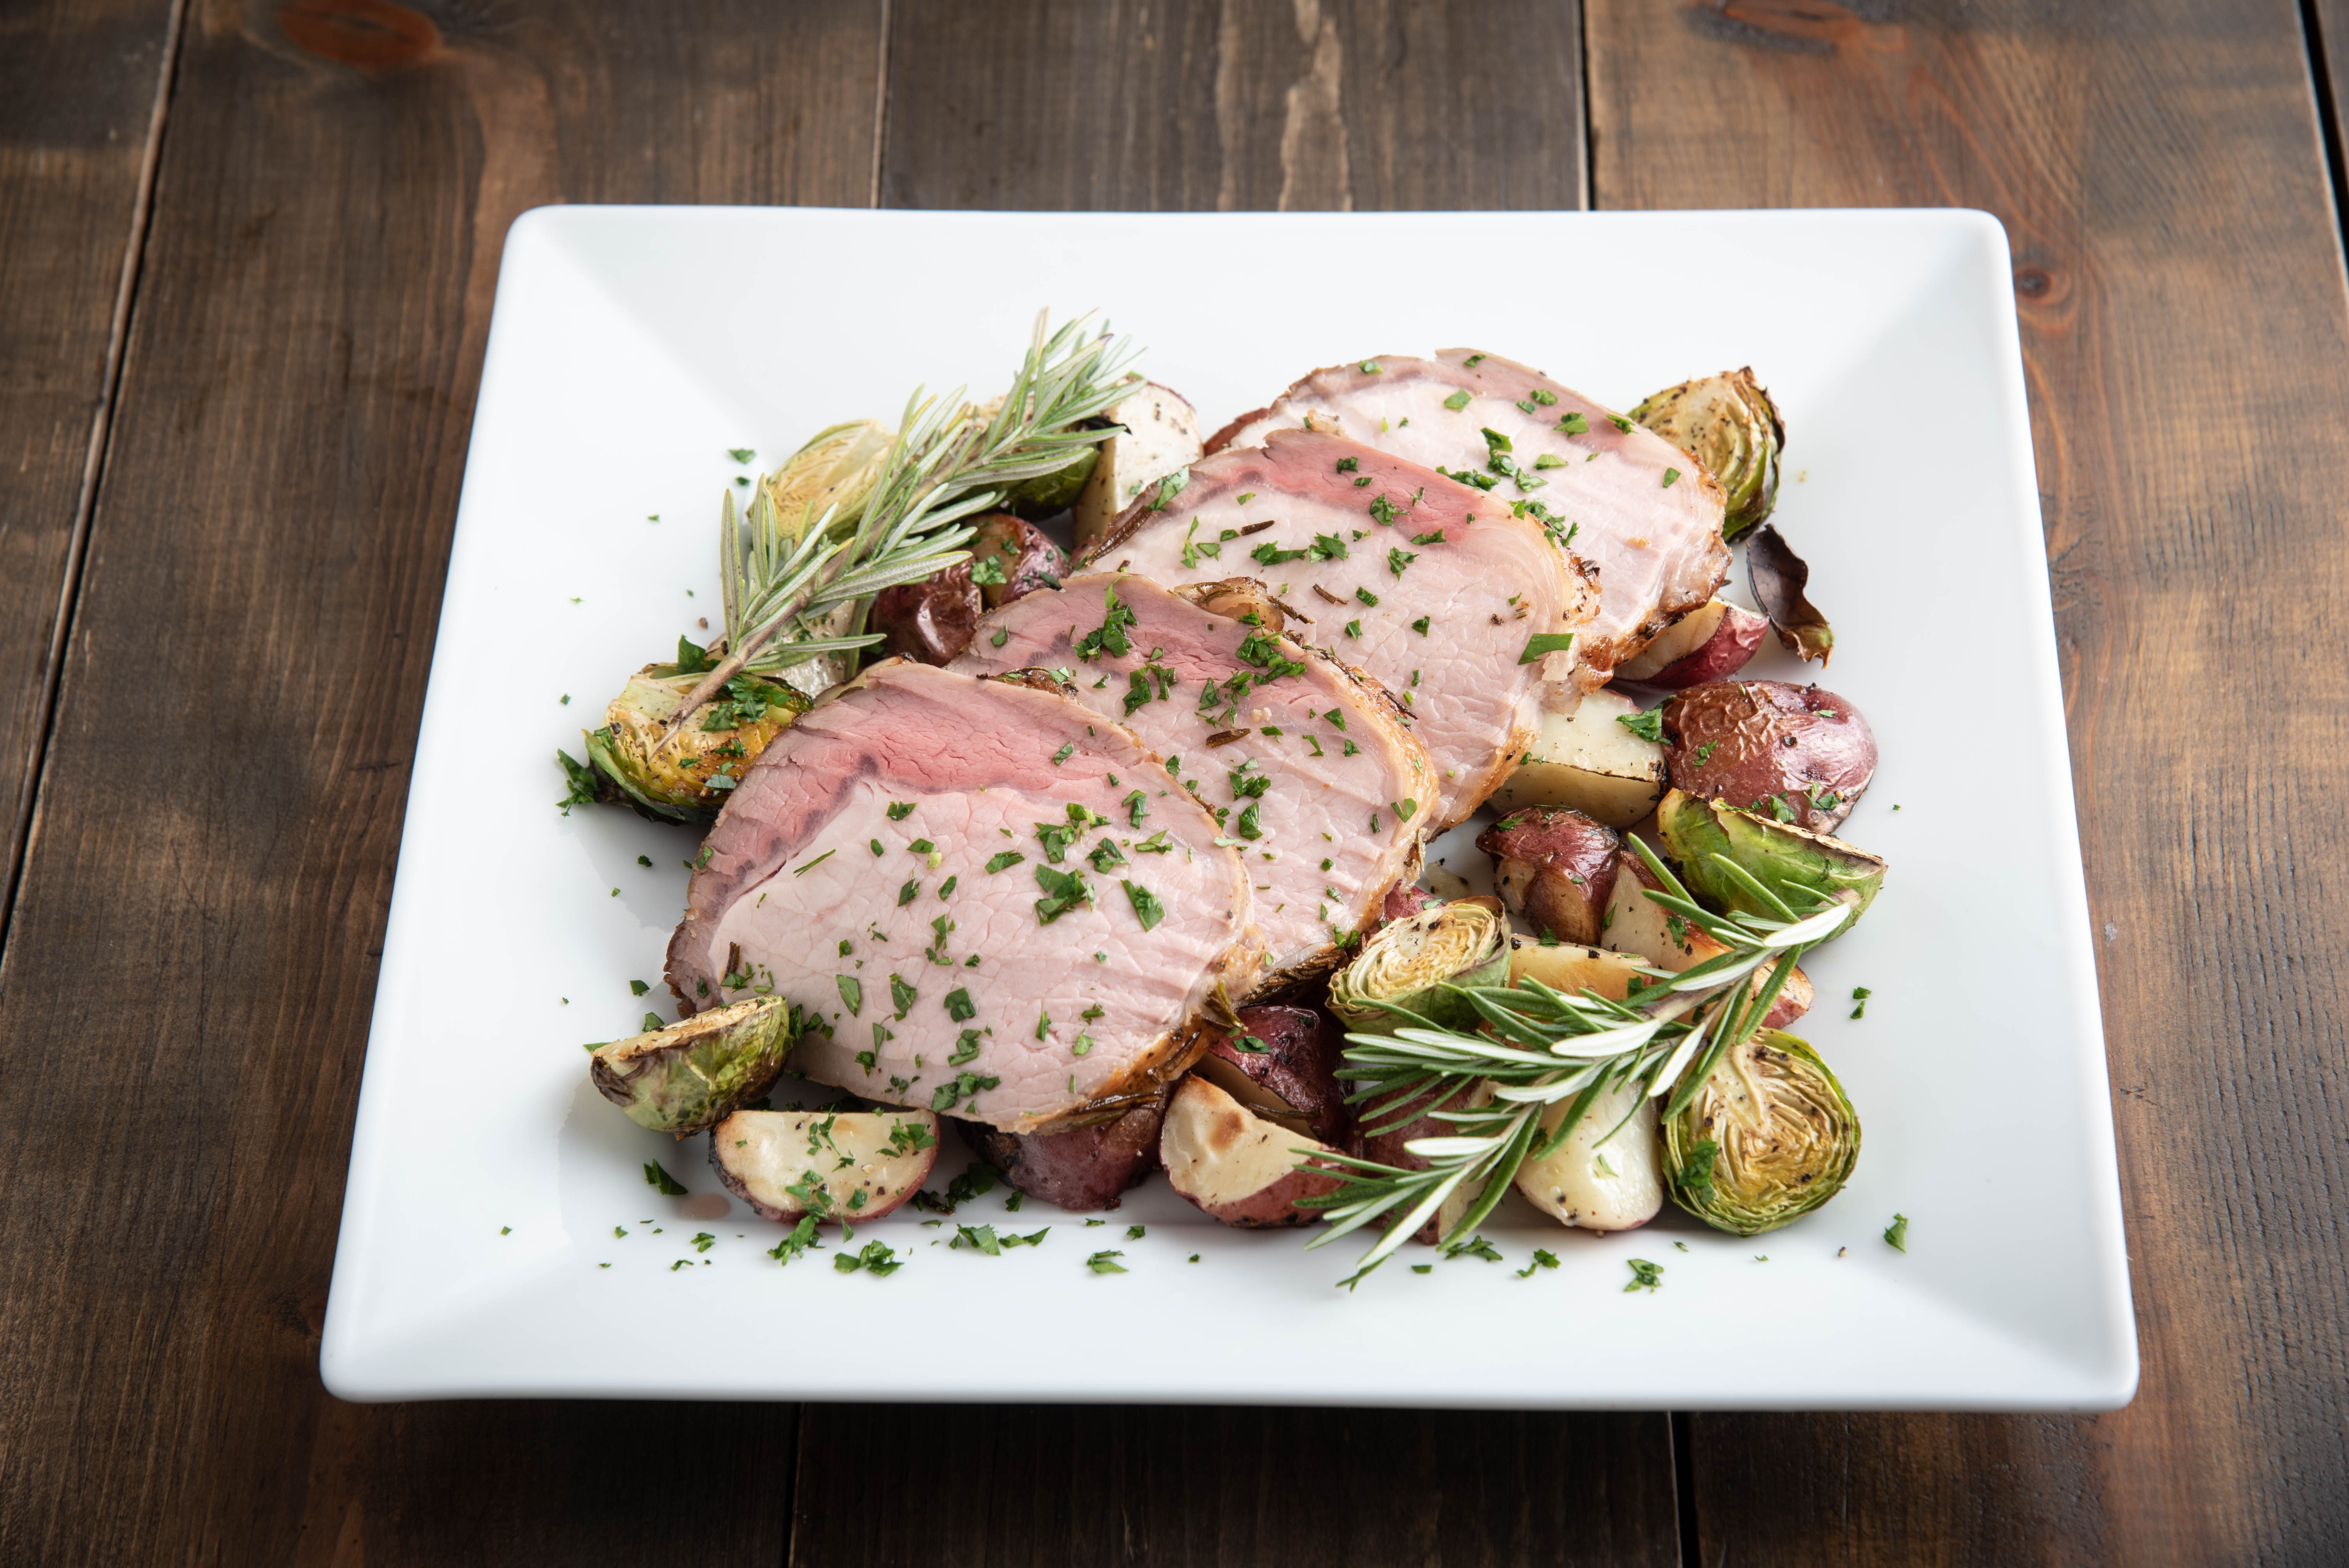 Cook A Pork Loin Roast With Olive Oil